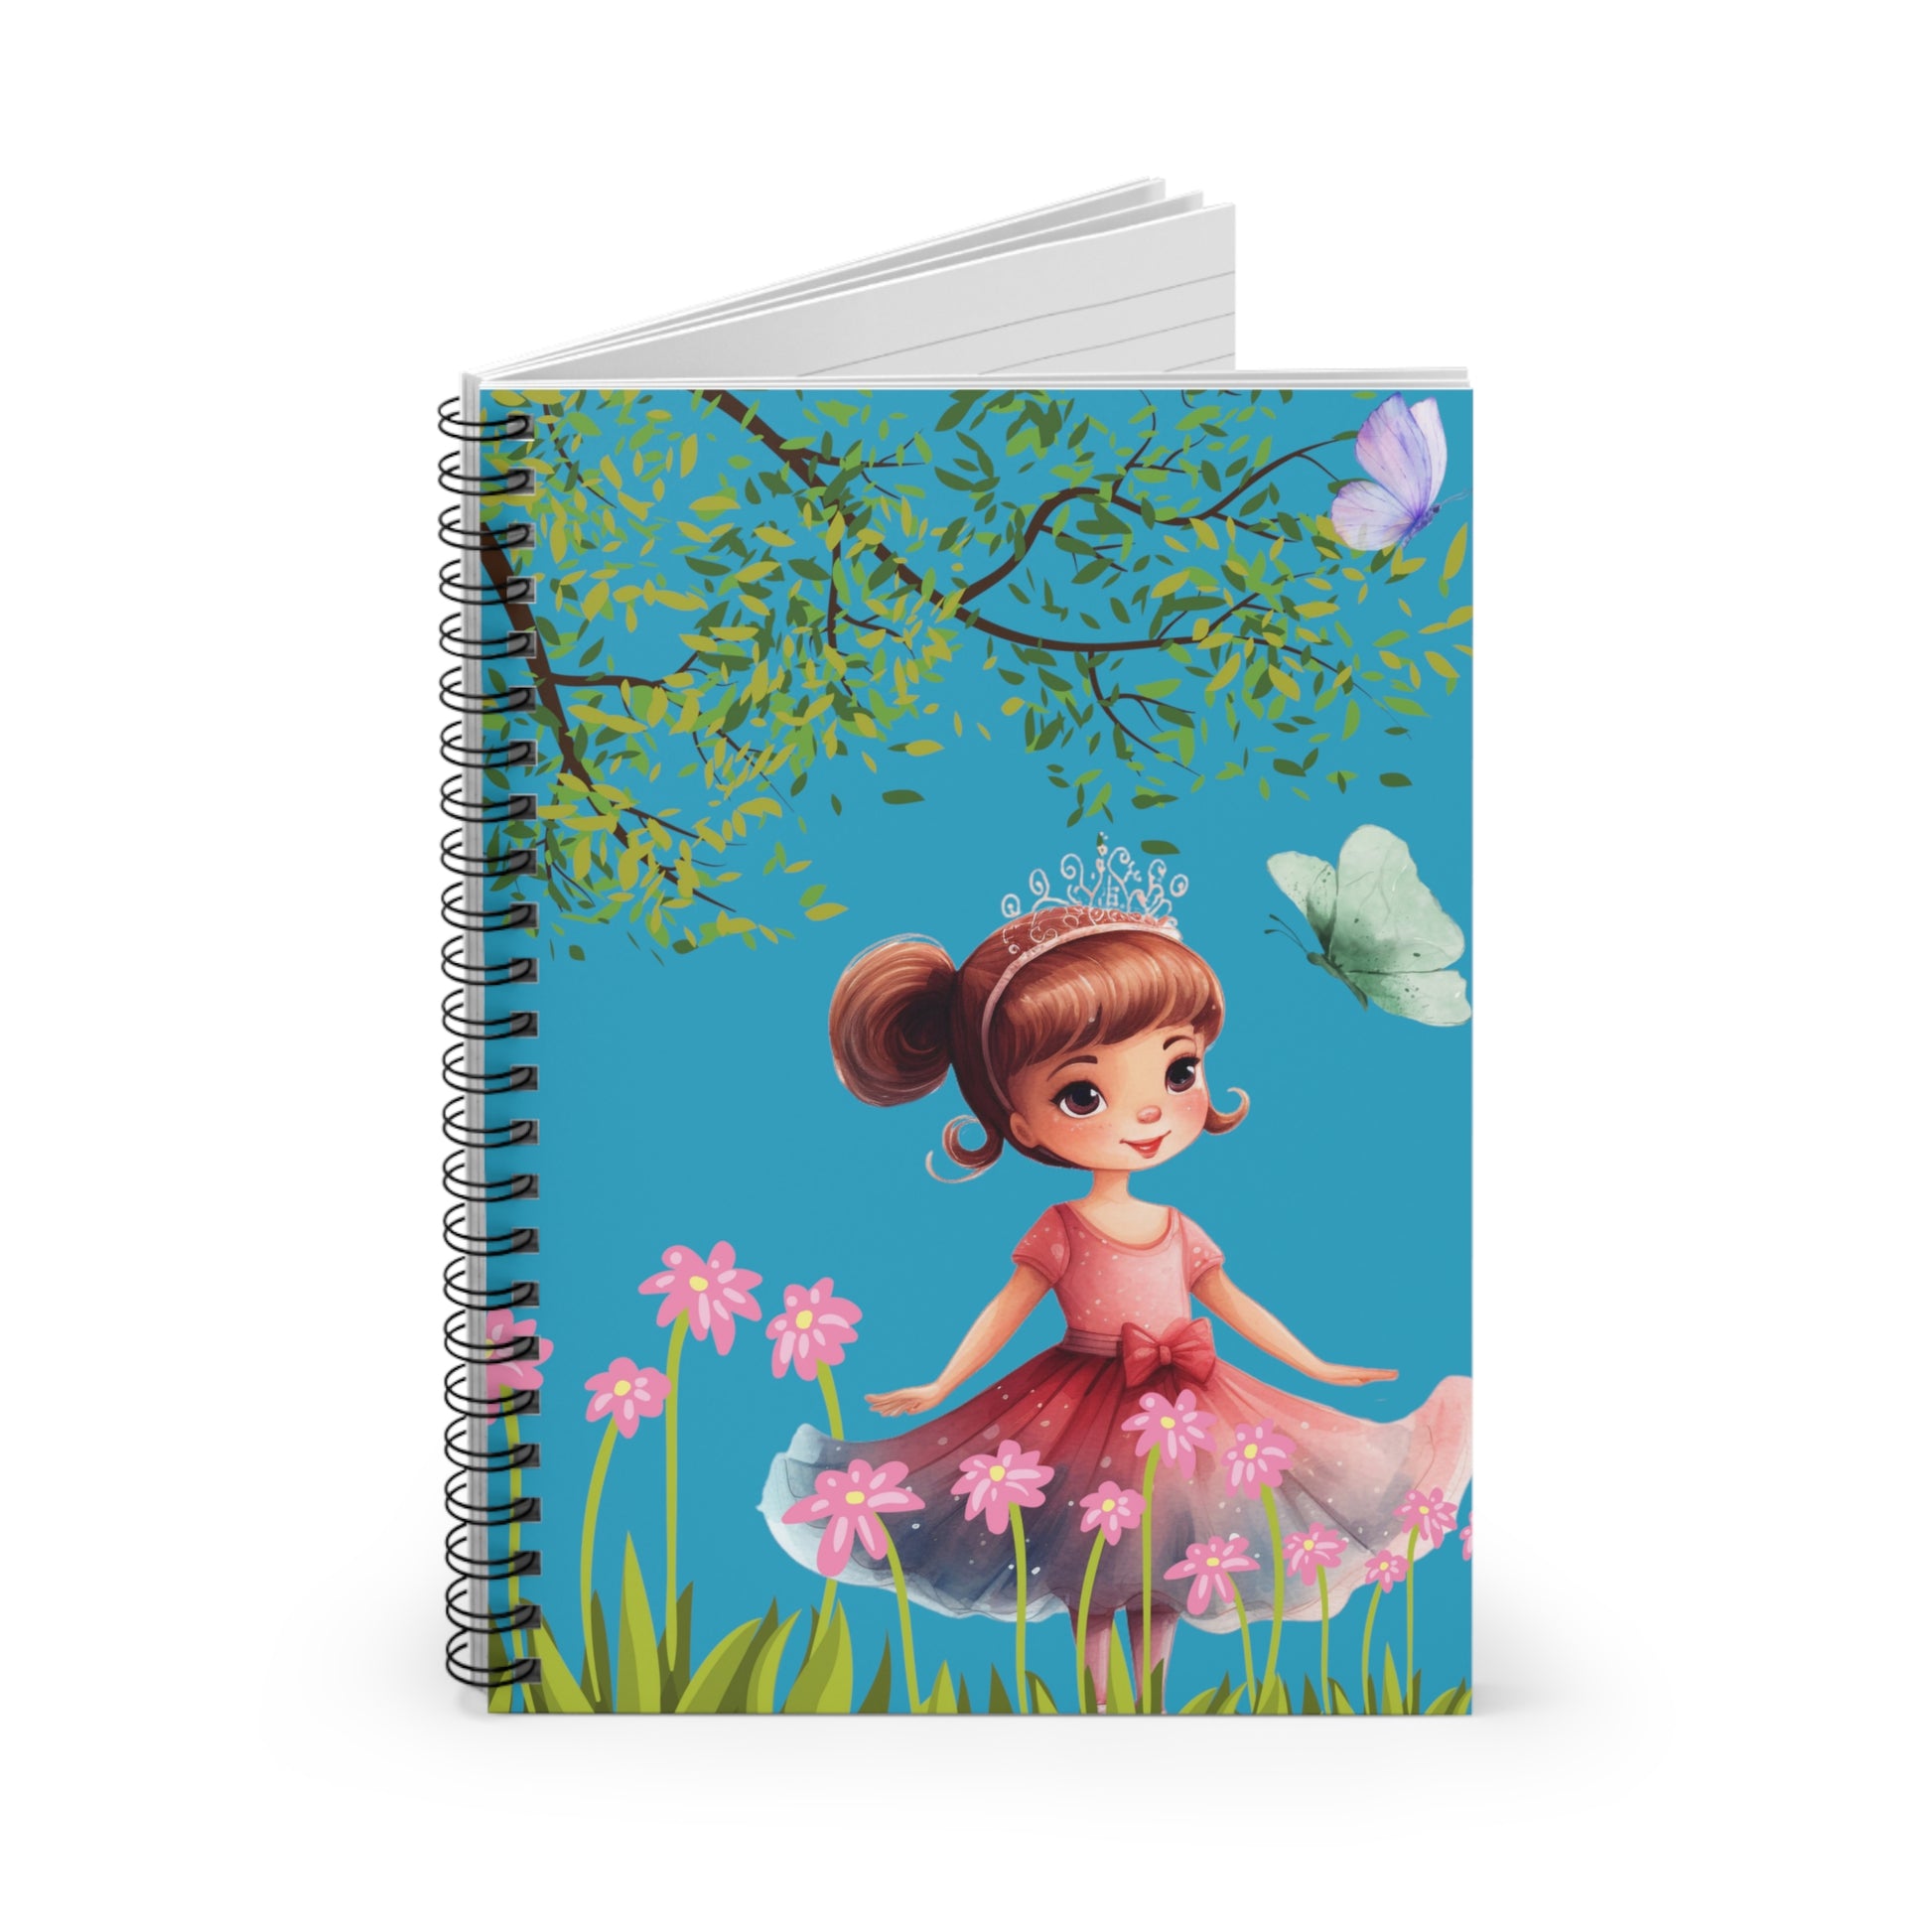 Butterfly Princess: Spiral Notebook - Log Books - Journals - Diaries - and More Custom Printed by TheGlassyLass